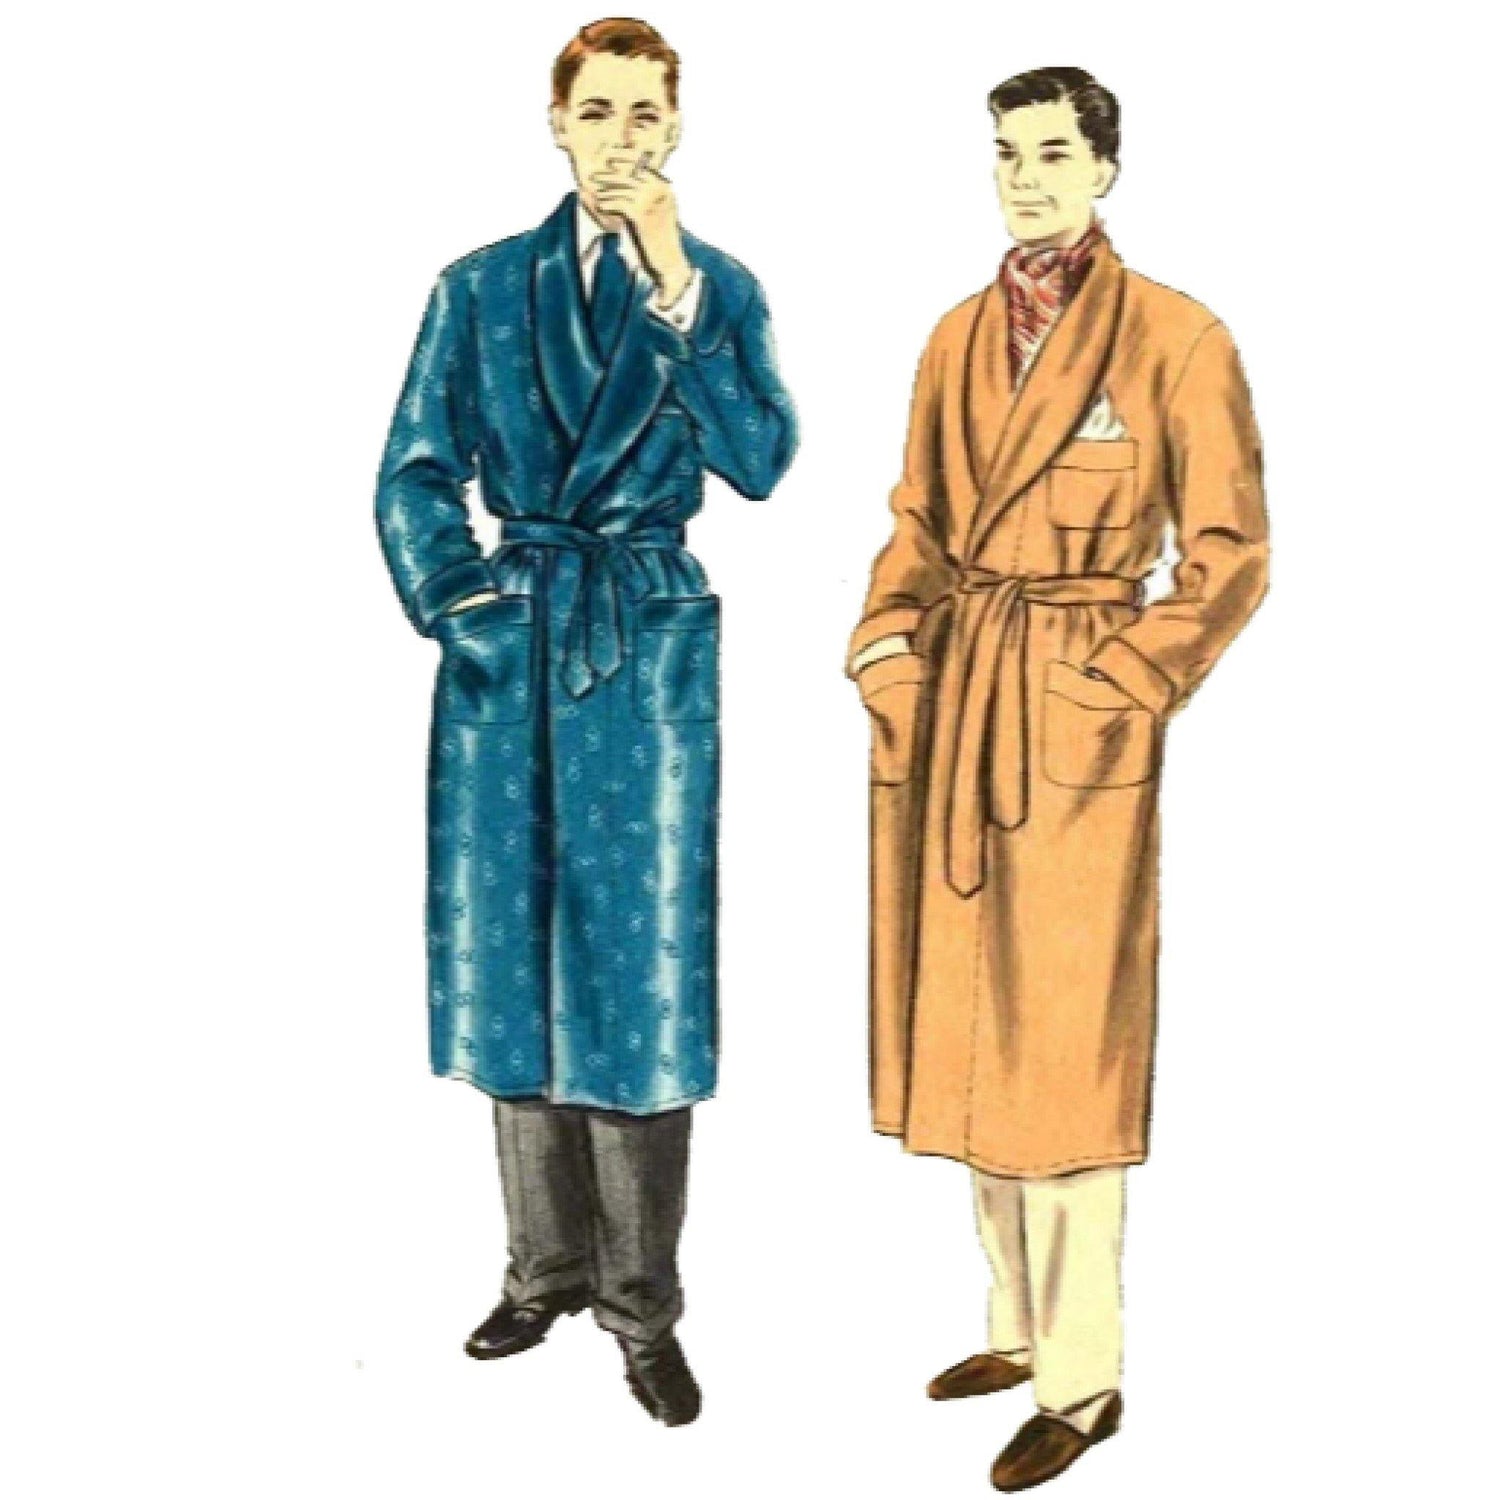 Vintage 1950s Sewing Pattern, Men's Dressing Gown - Vintage Sewing Pattern Company